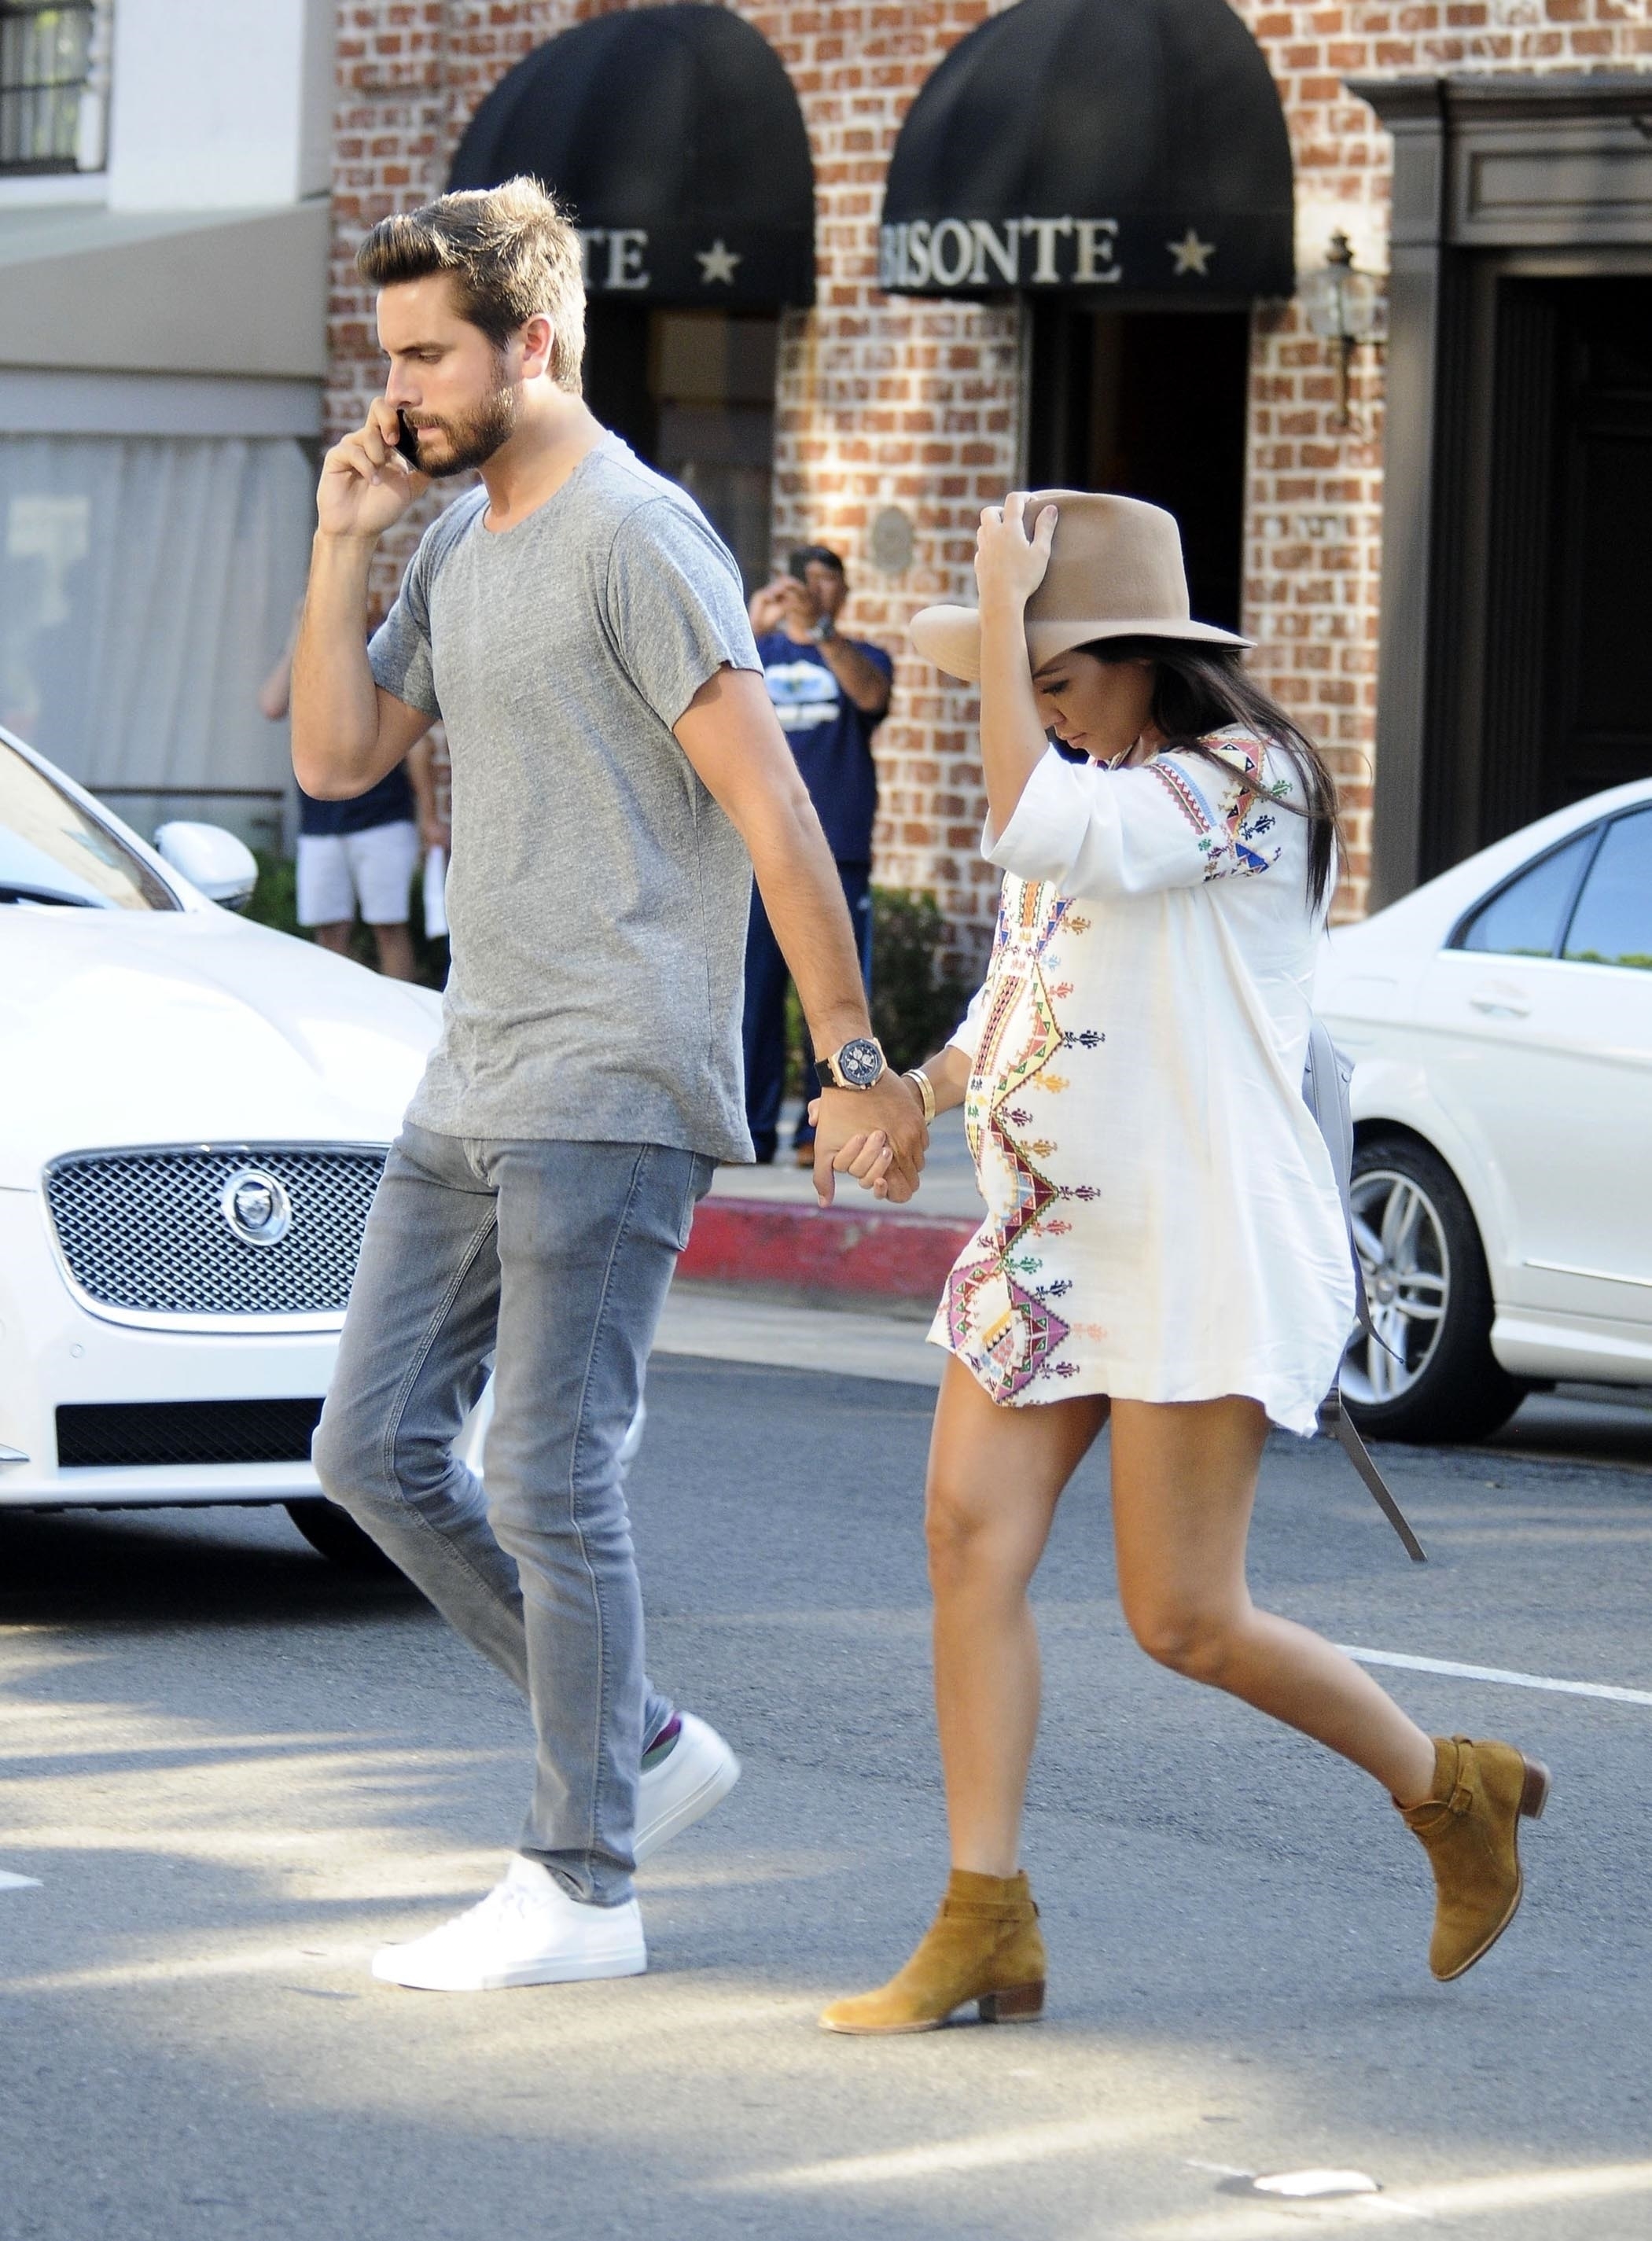 Scott Disick and a pregnant Kourtney Kardashian crossing the street as they hold hands